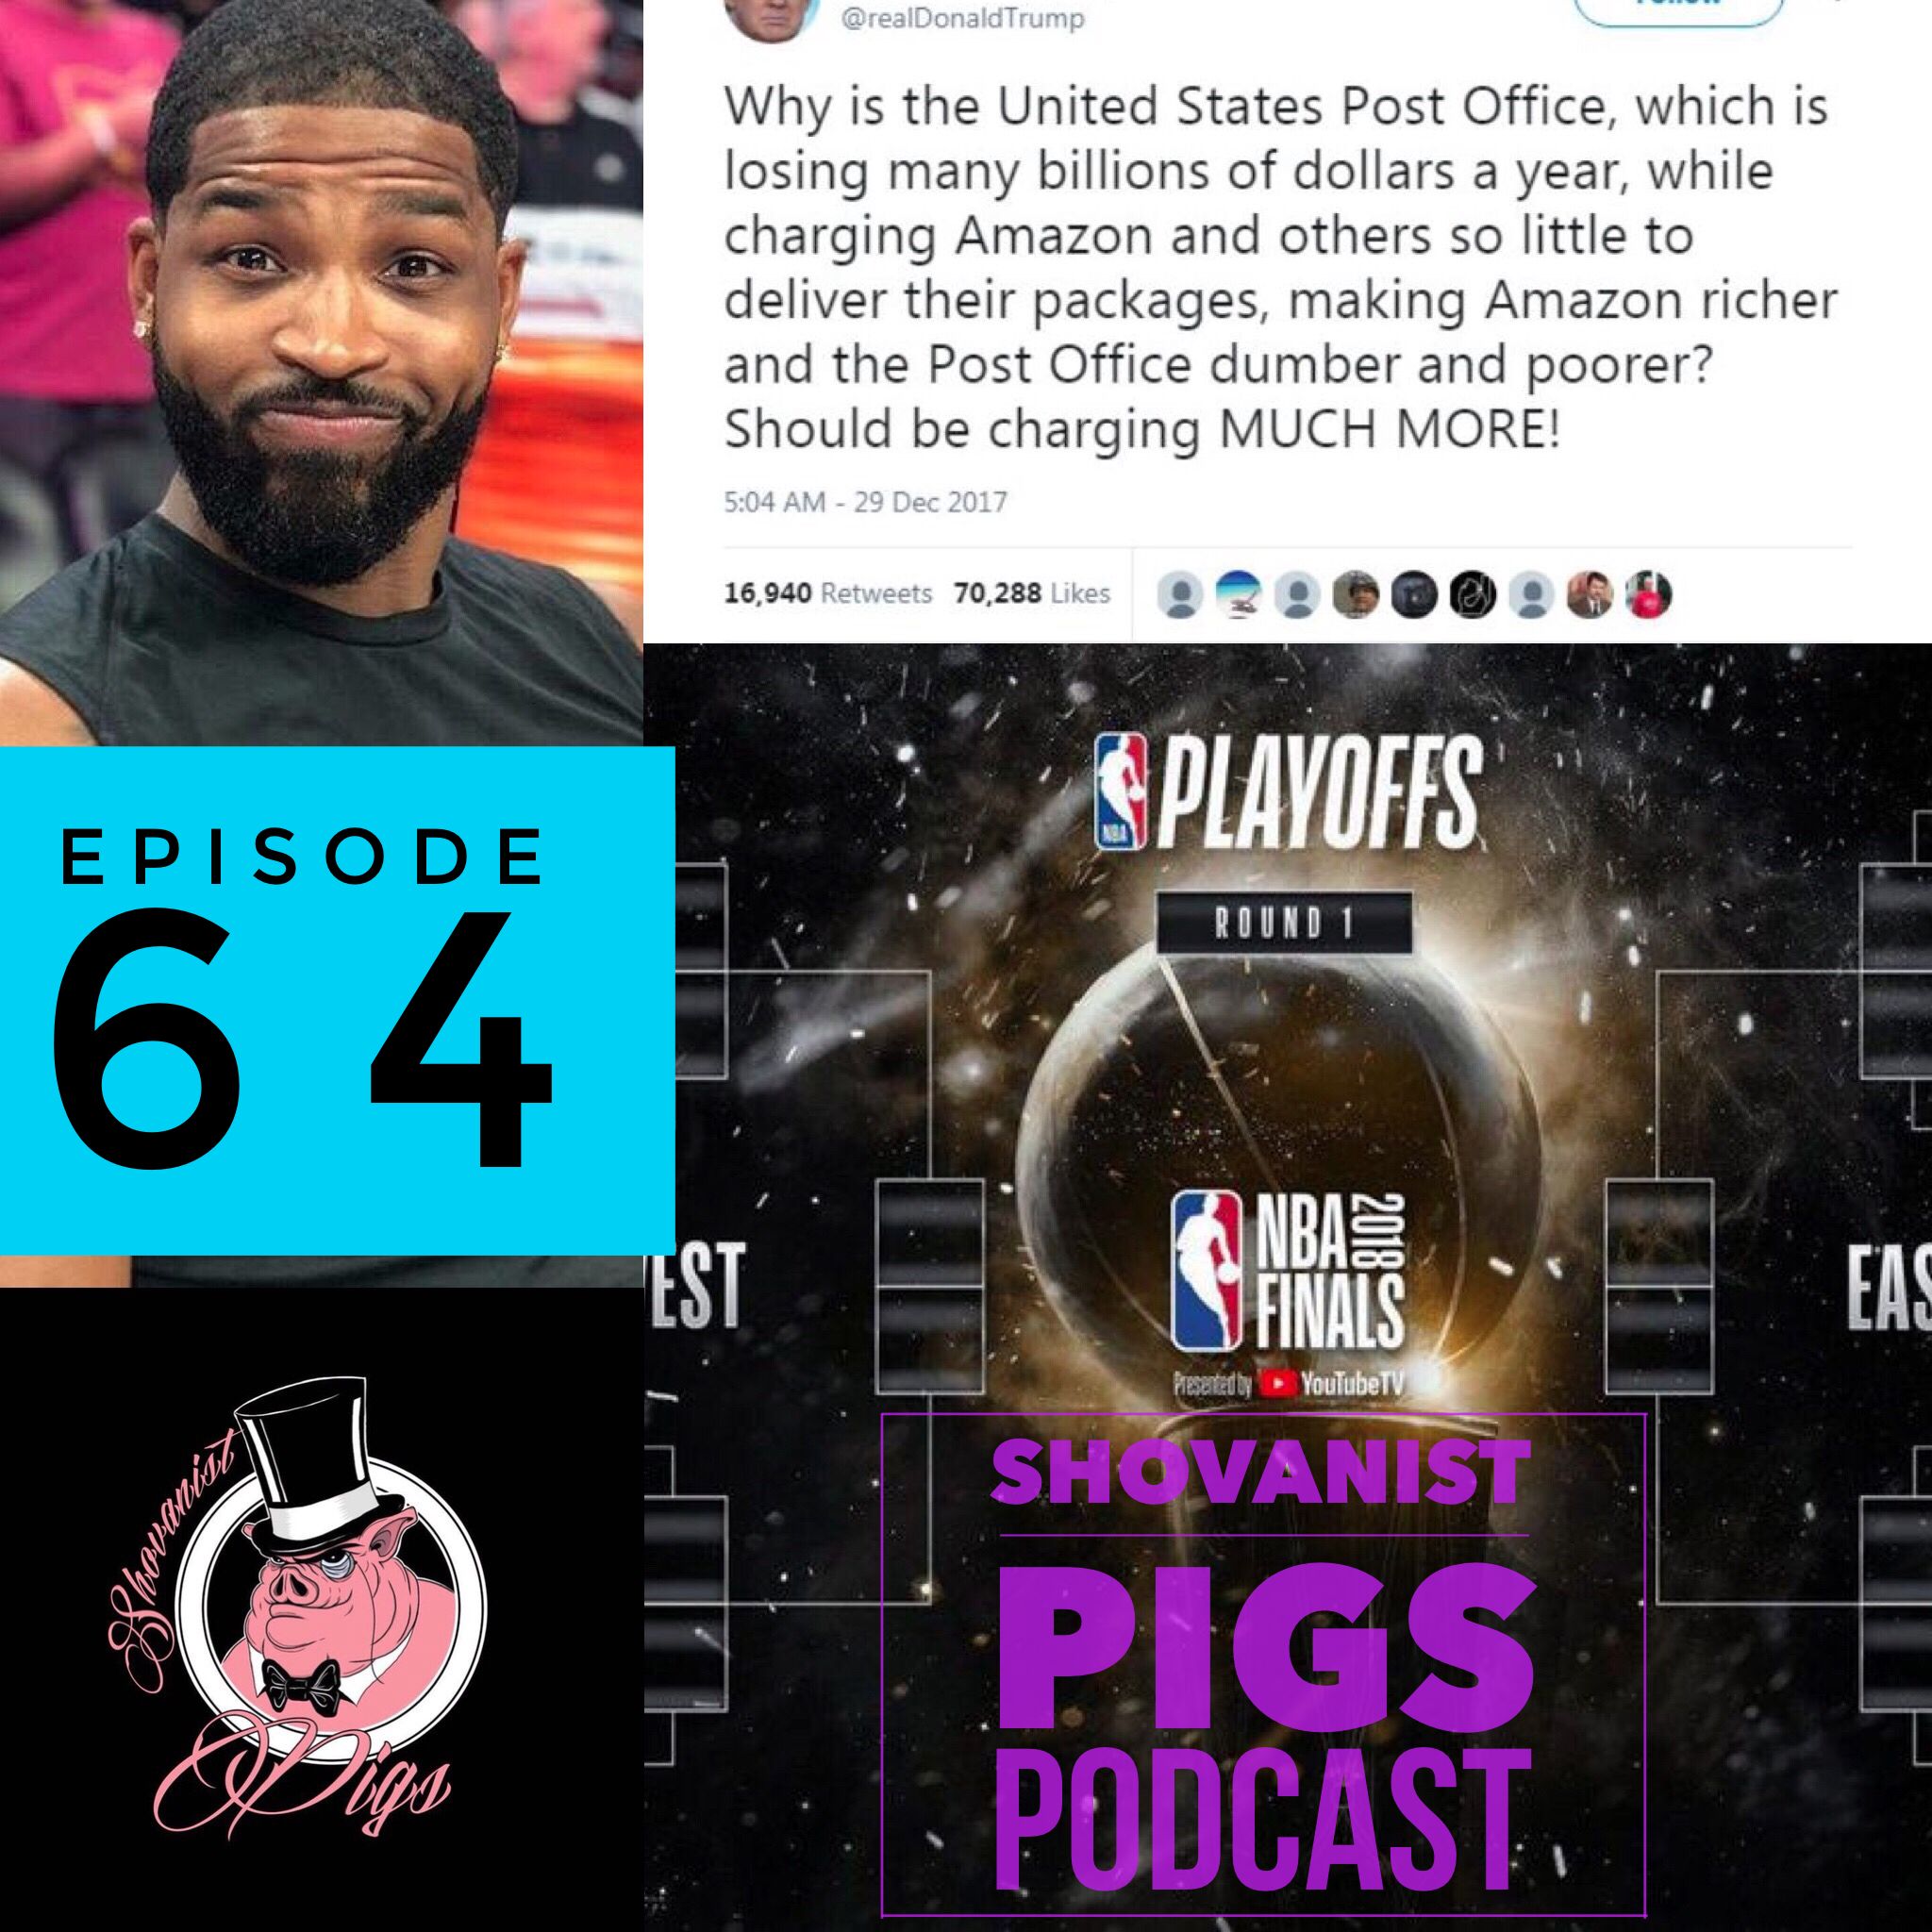 ep. 64 "Why Tristan?, Trump on that BS, NBA Playoffs"